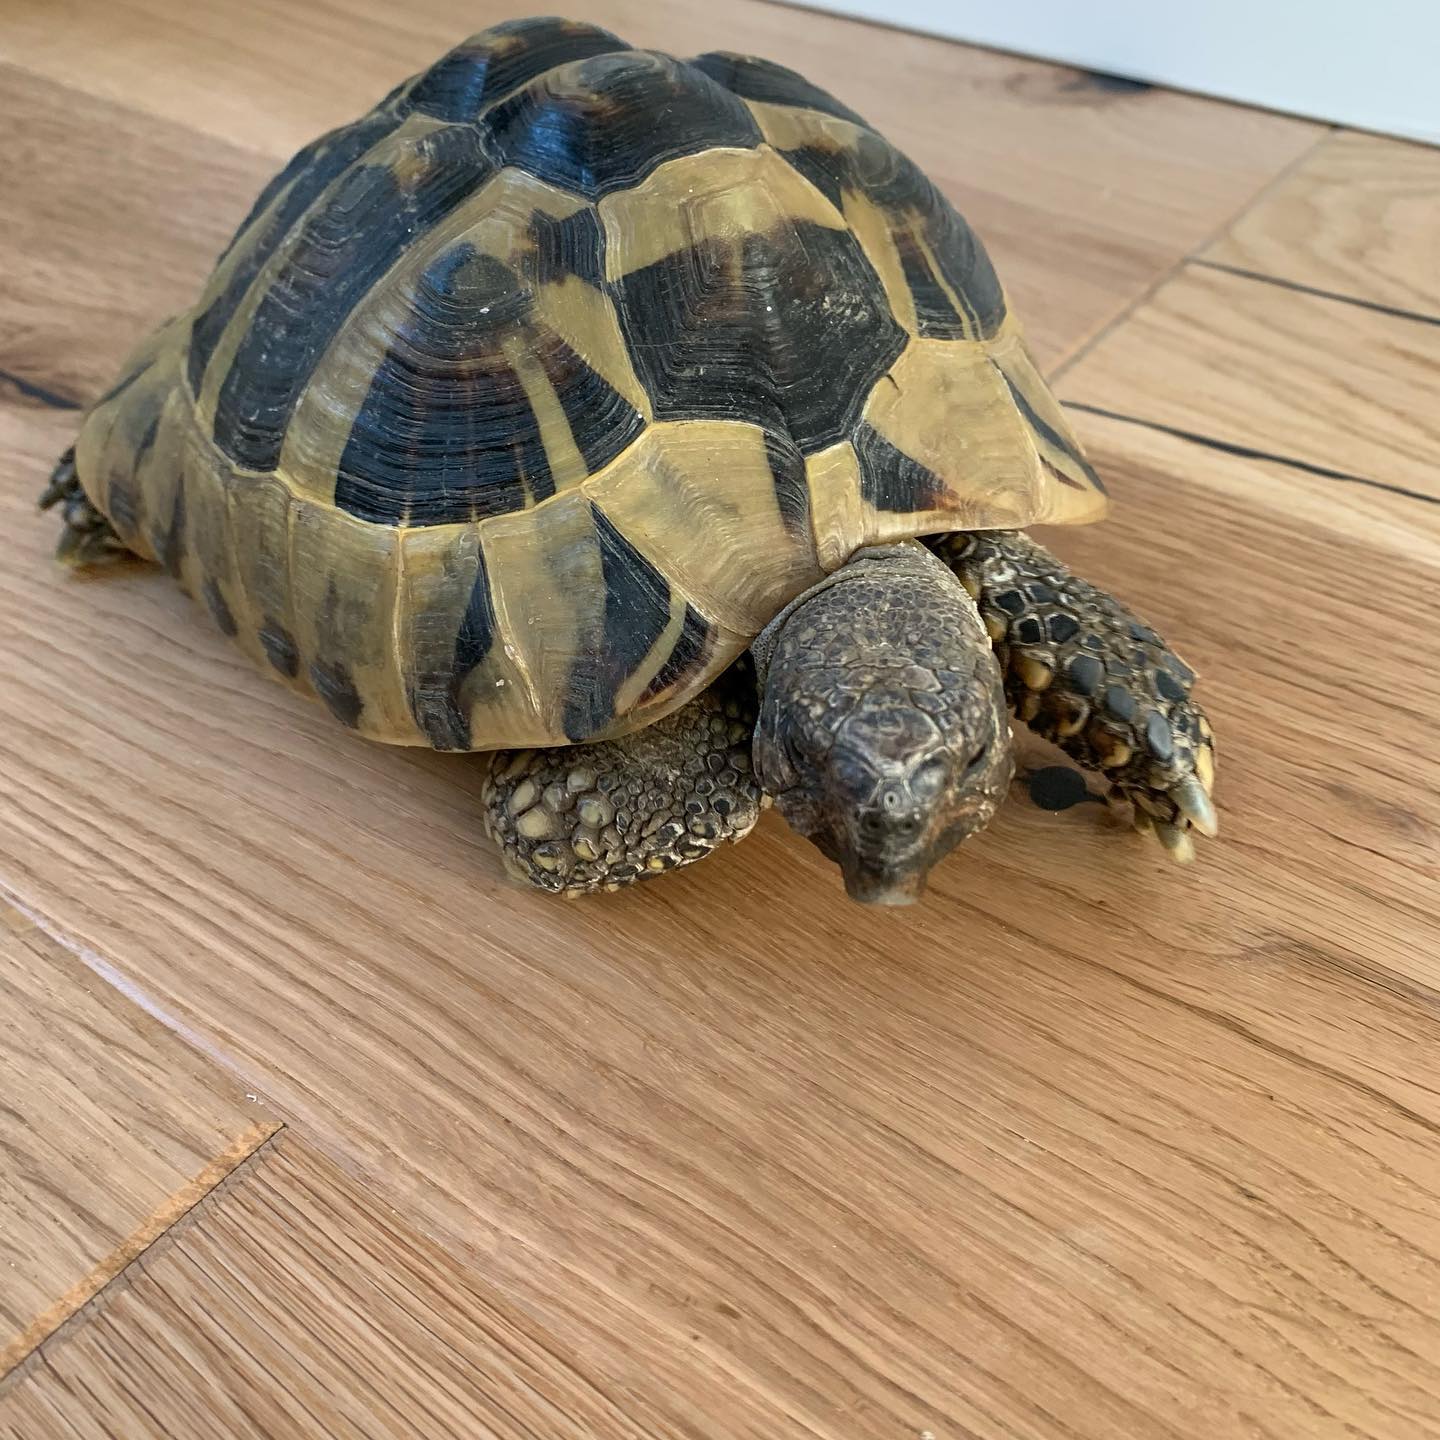 Admiring this beautiful oak floor with Scoot the Tortoise